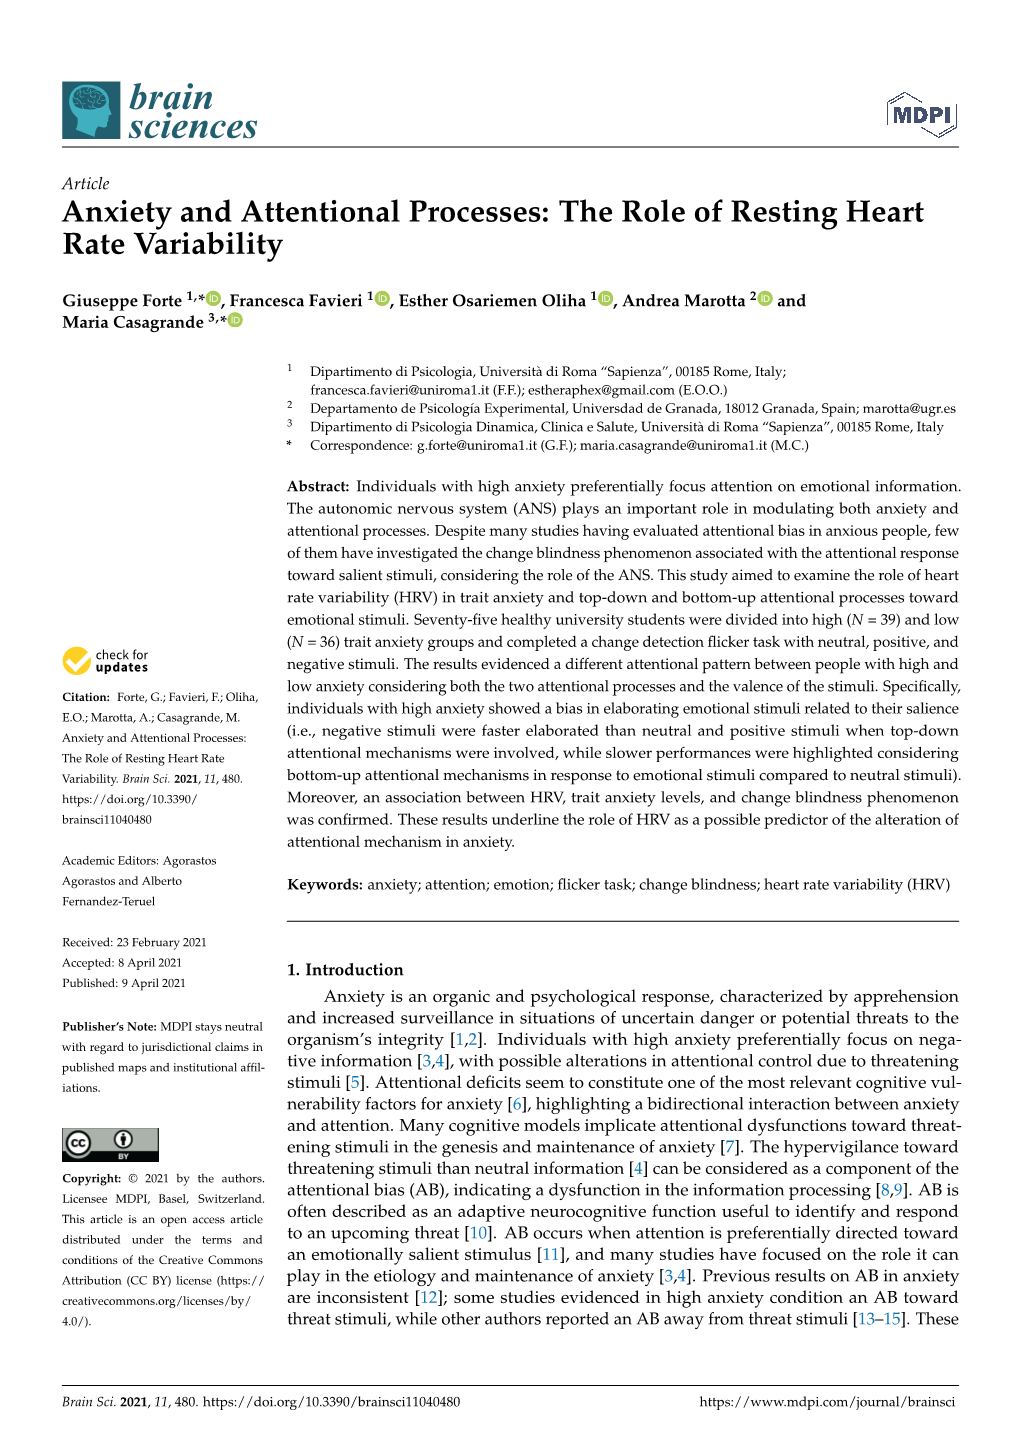 Anxiety and Attentional Processes: the Role of Resting Heart Rate Variability